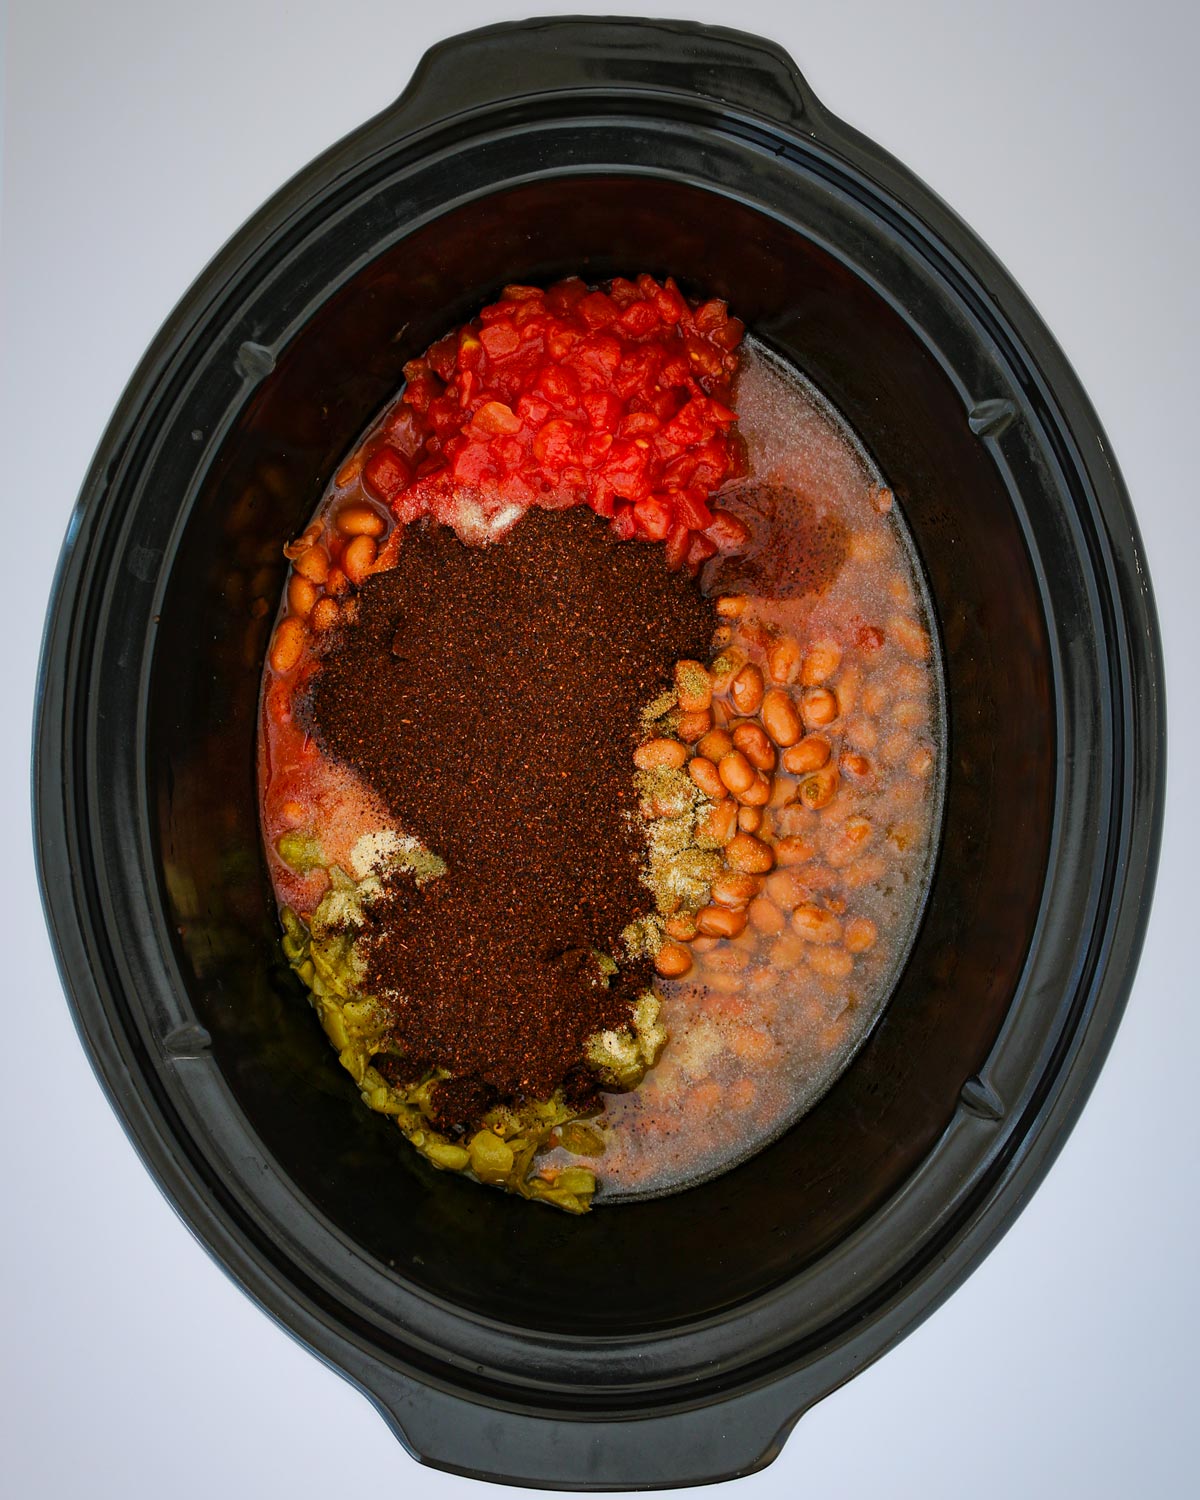 beans, meat, tomatoes, and spices in the slow cooker.